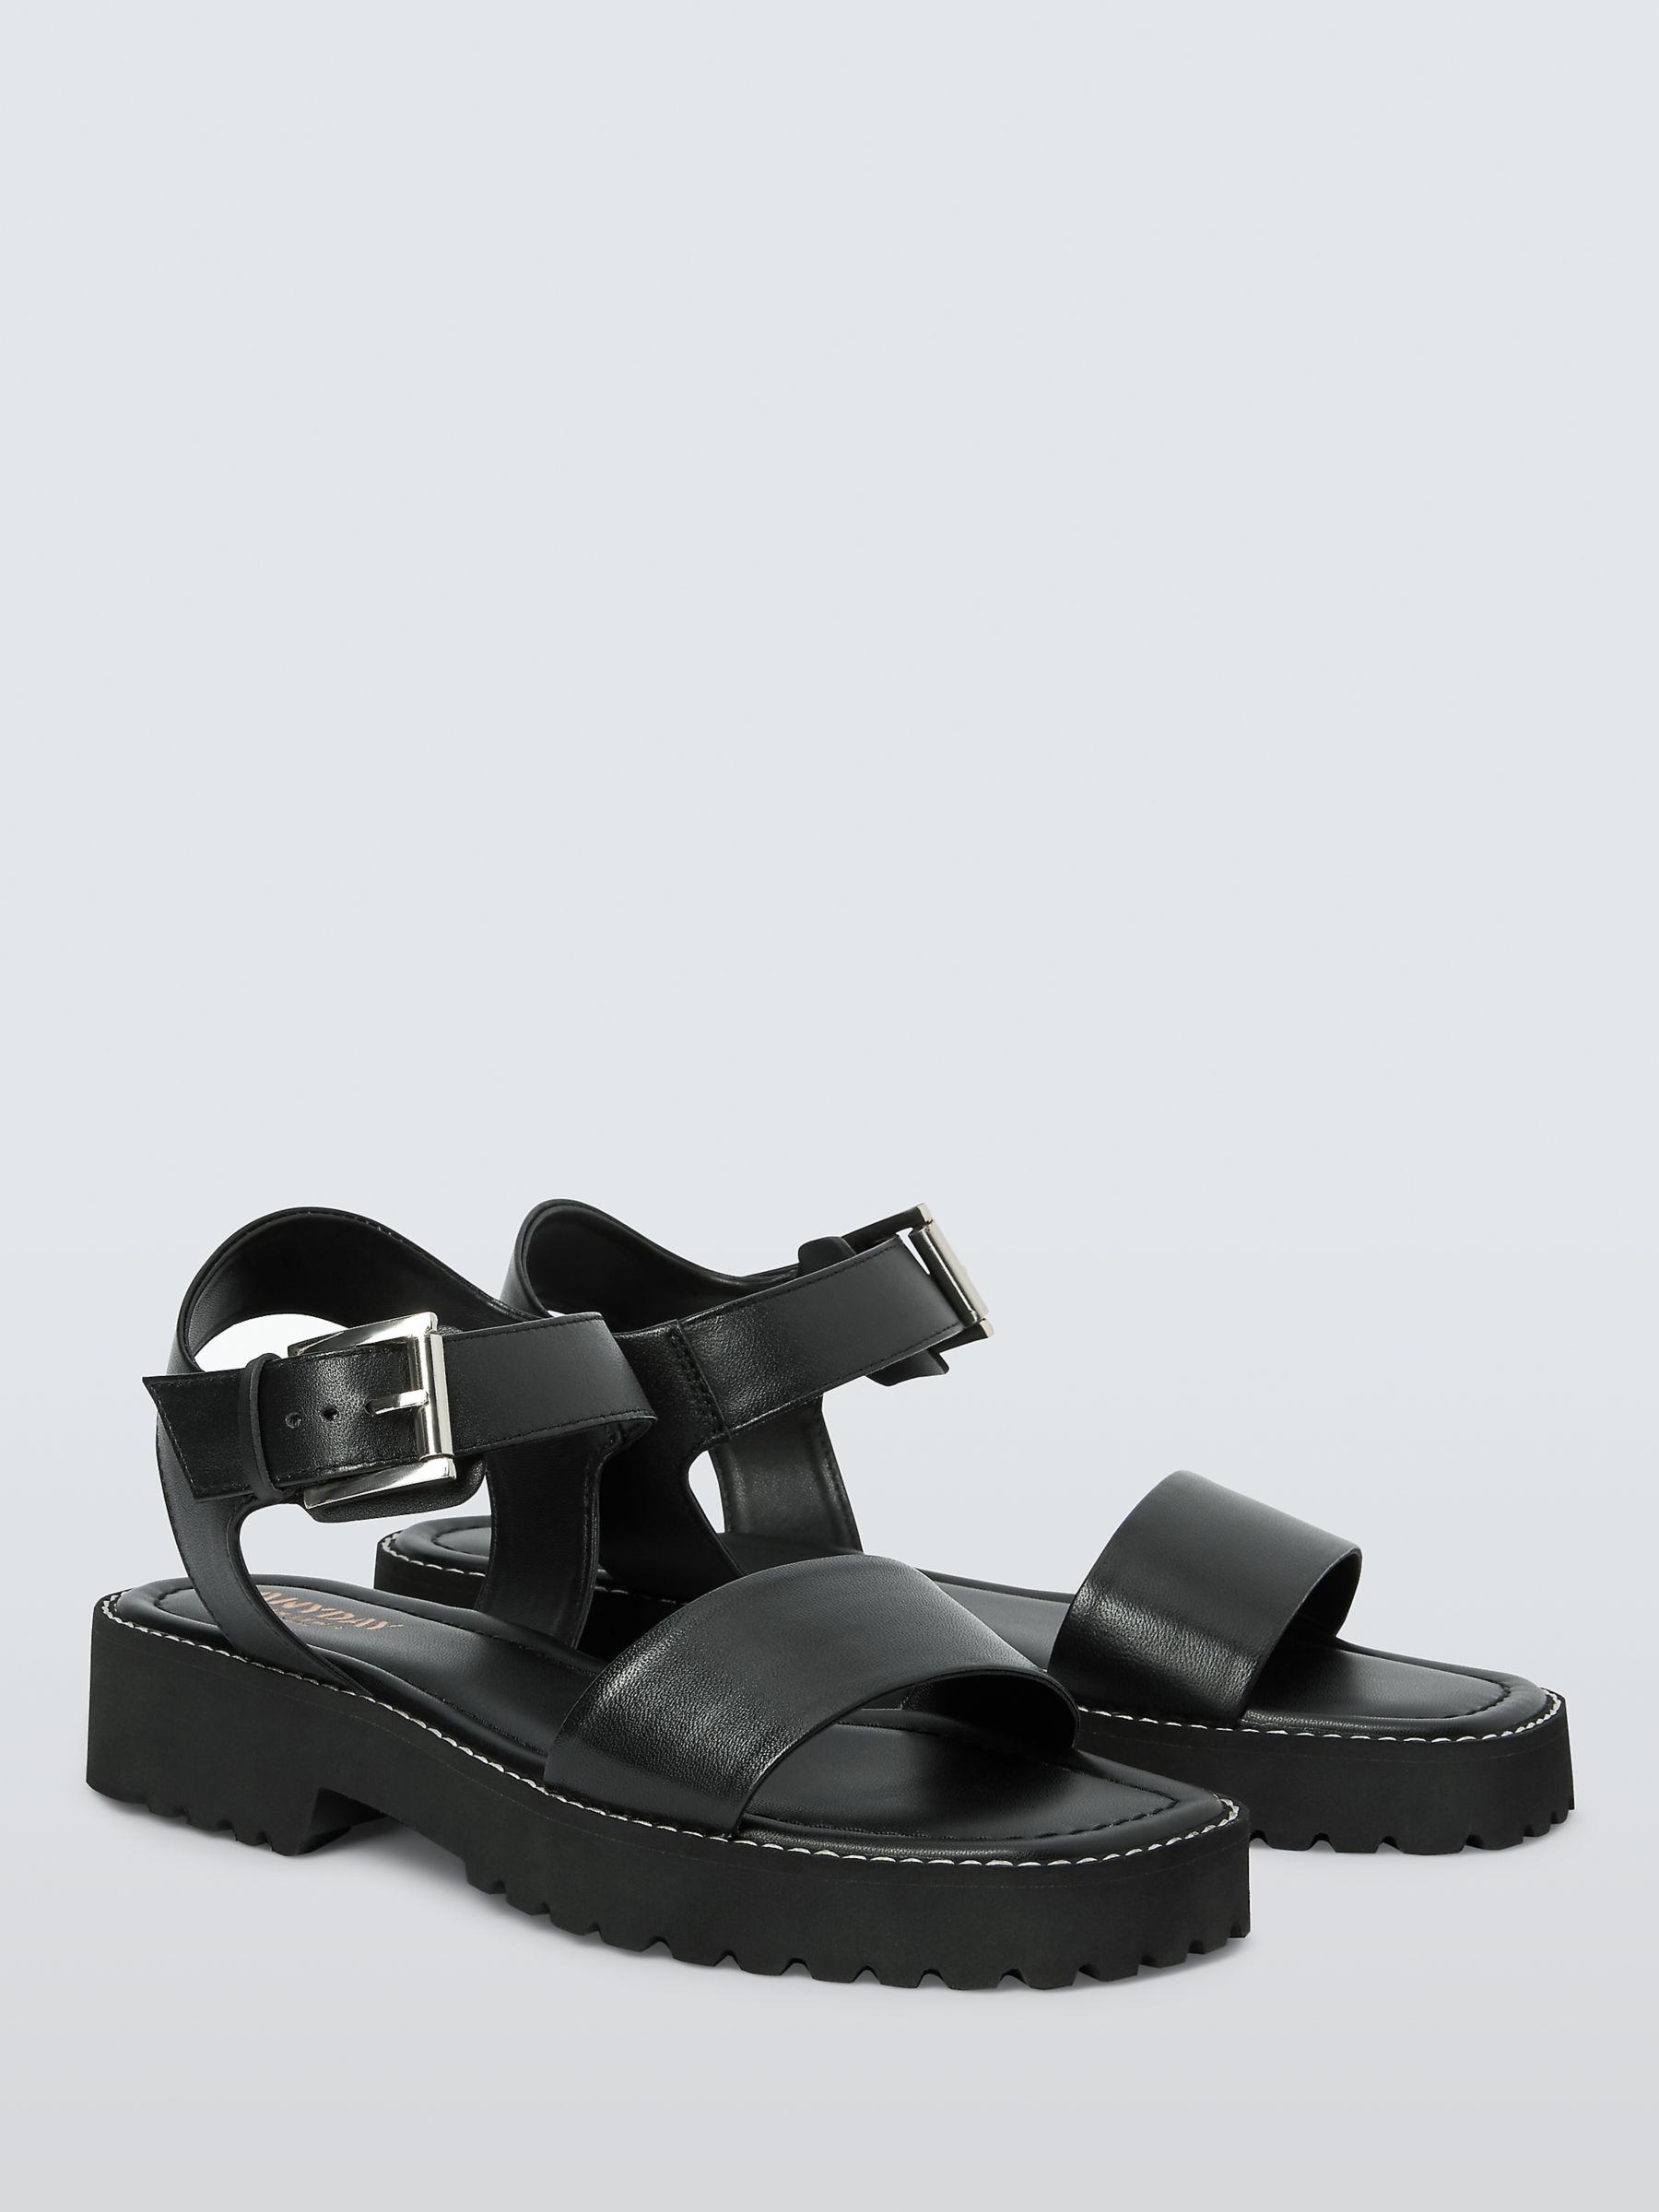 John Lewis ANYDAY Loreen Leather Ankle Strap Sandals, Black, 6